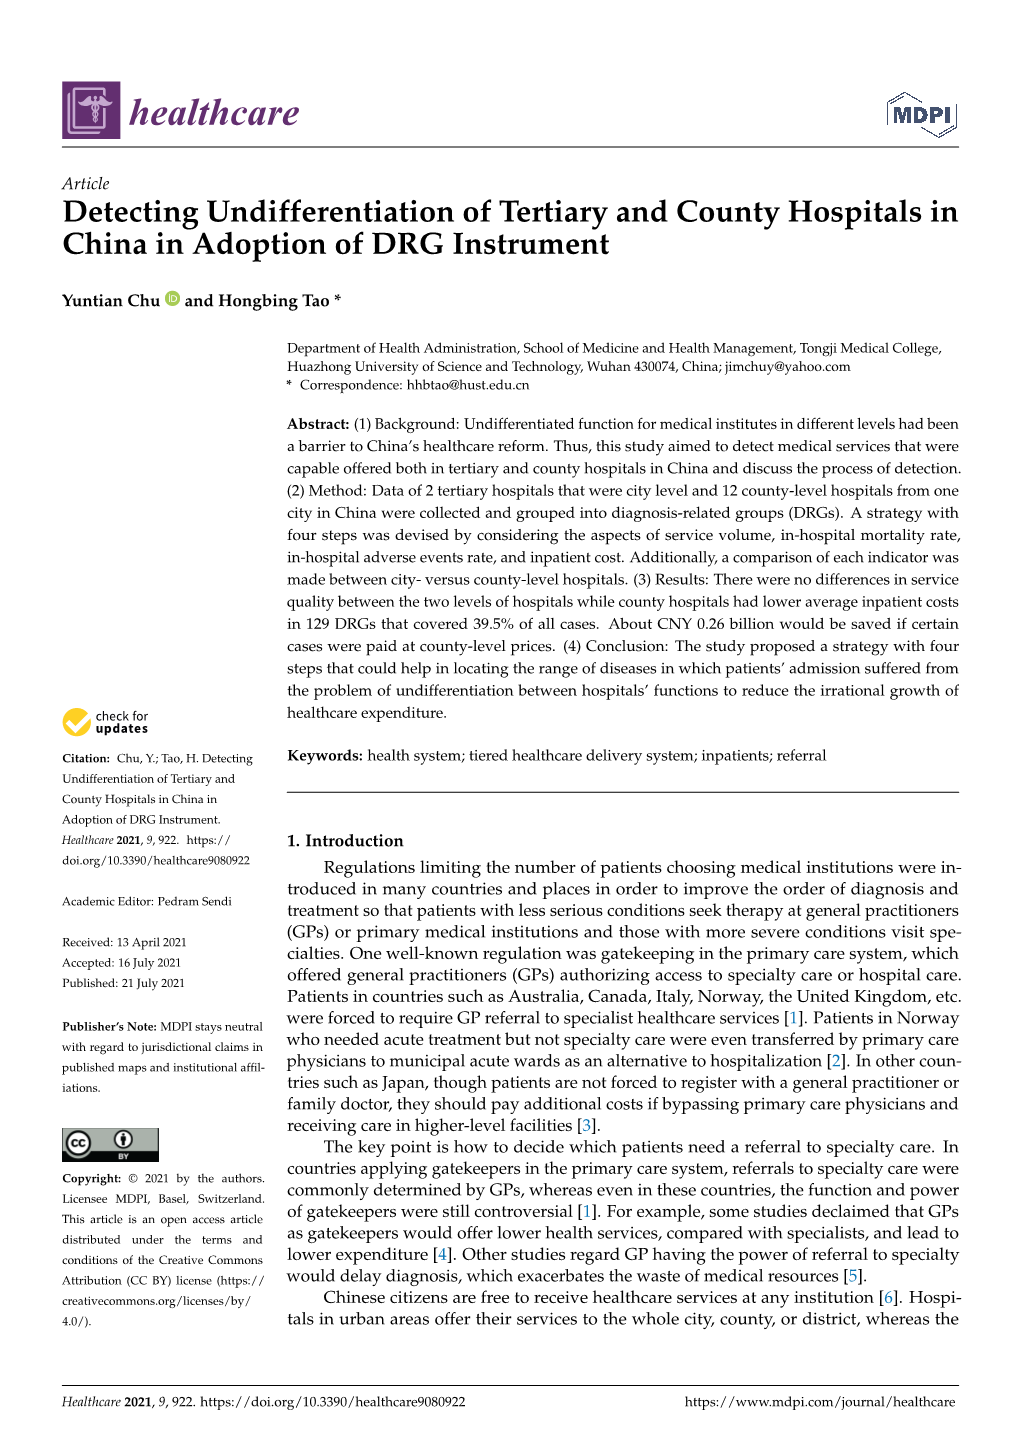 Detecting Undifferentiation of Tertiary and County Hospitals in China in Adoption of DRG Instrument